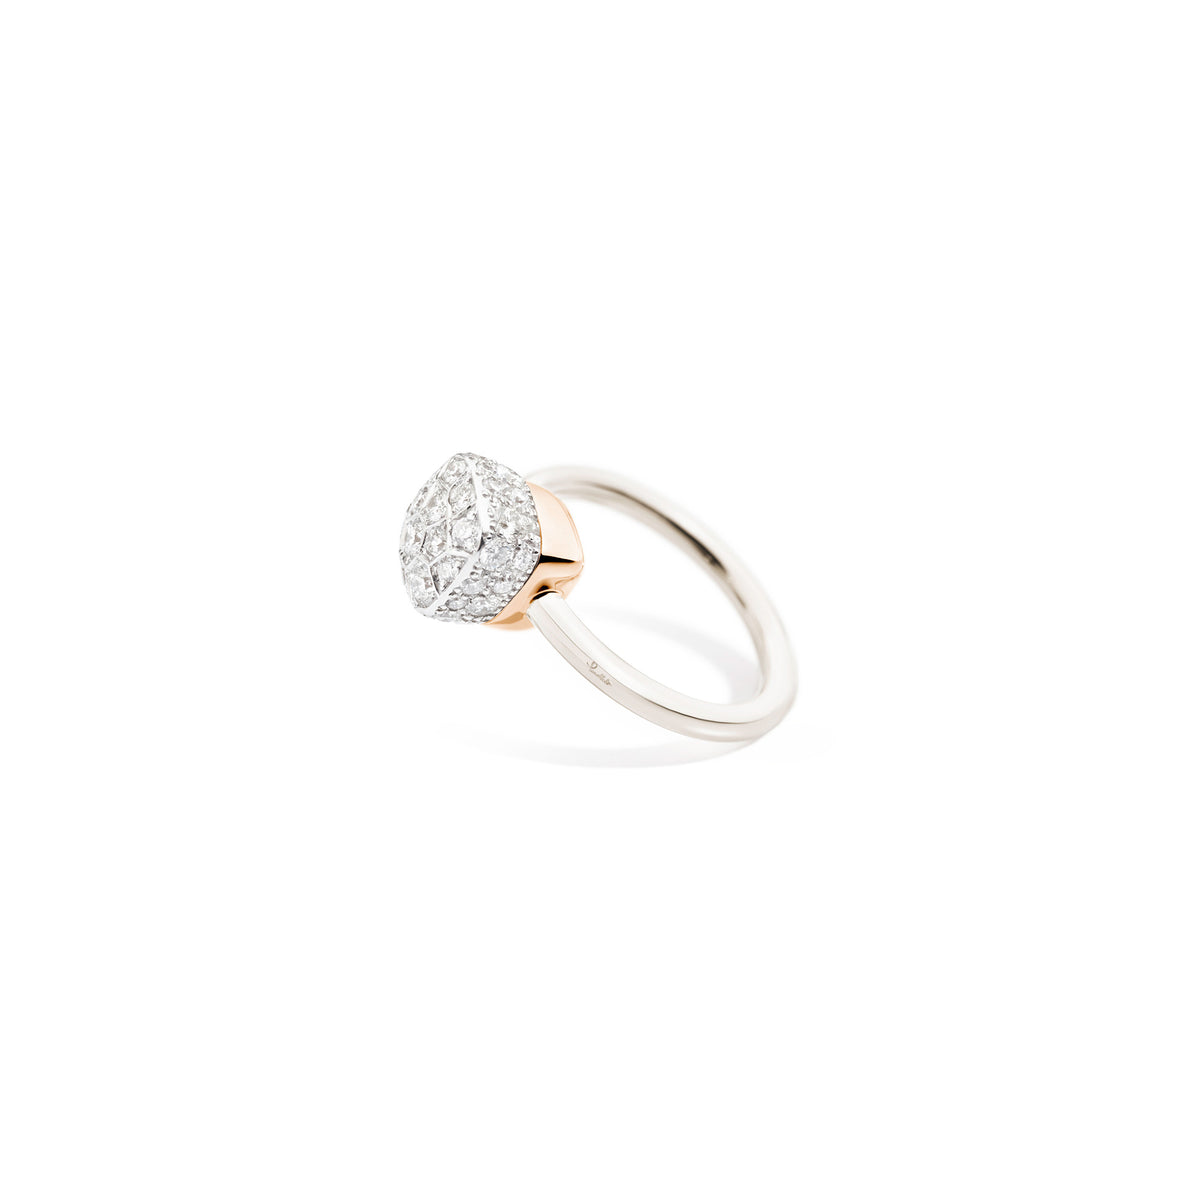 Nudo Petit Ring in 18k White Gold and Rose Gold with Diamonds - Orsini Jewellers NZ